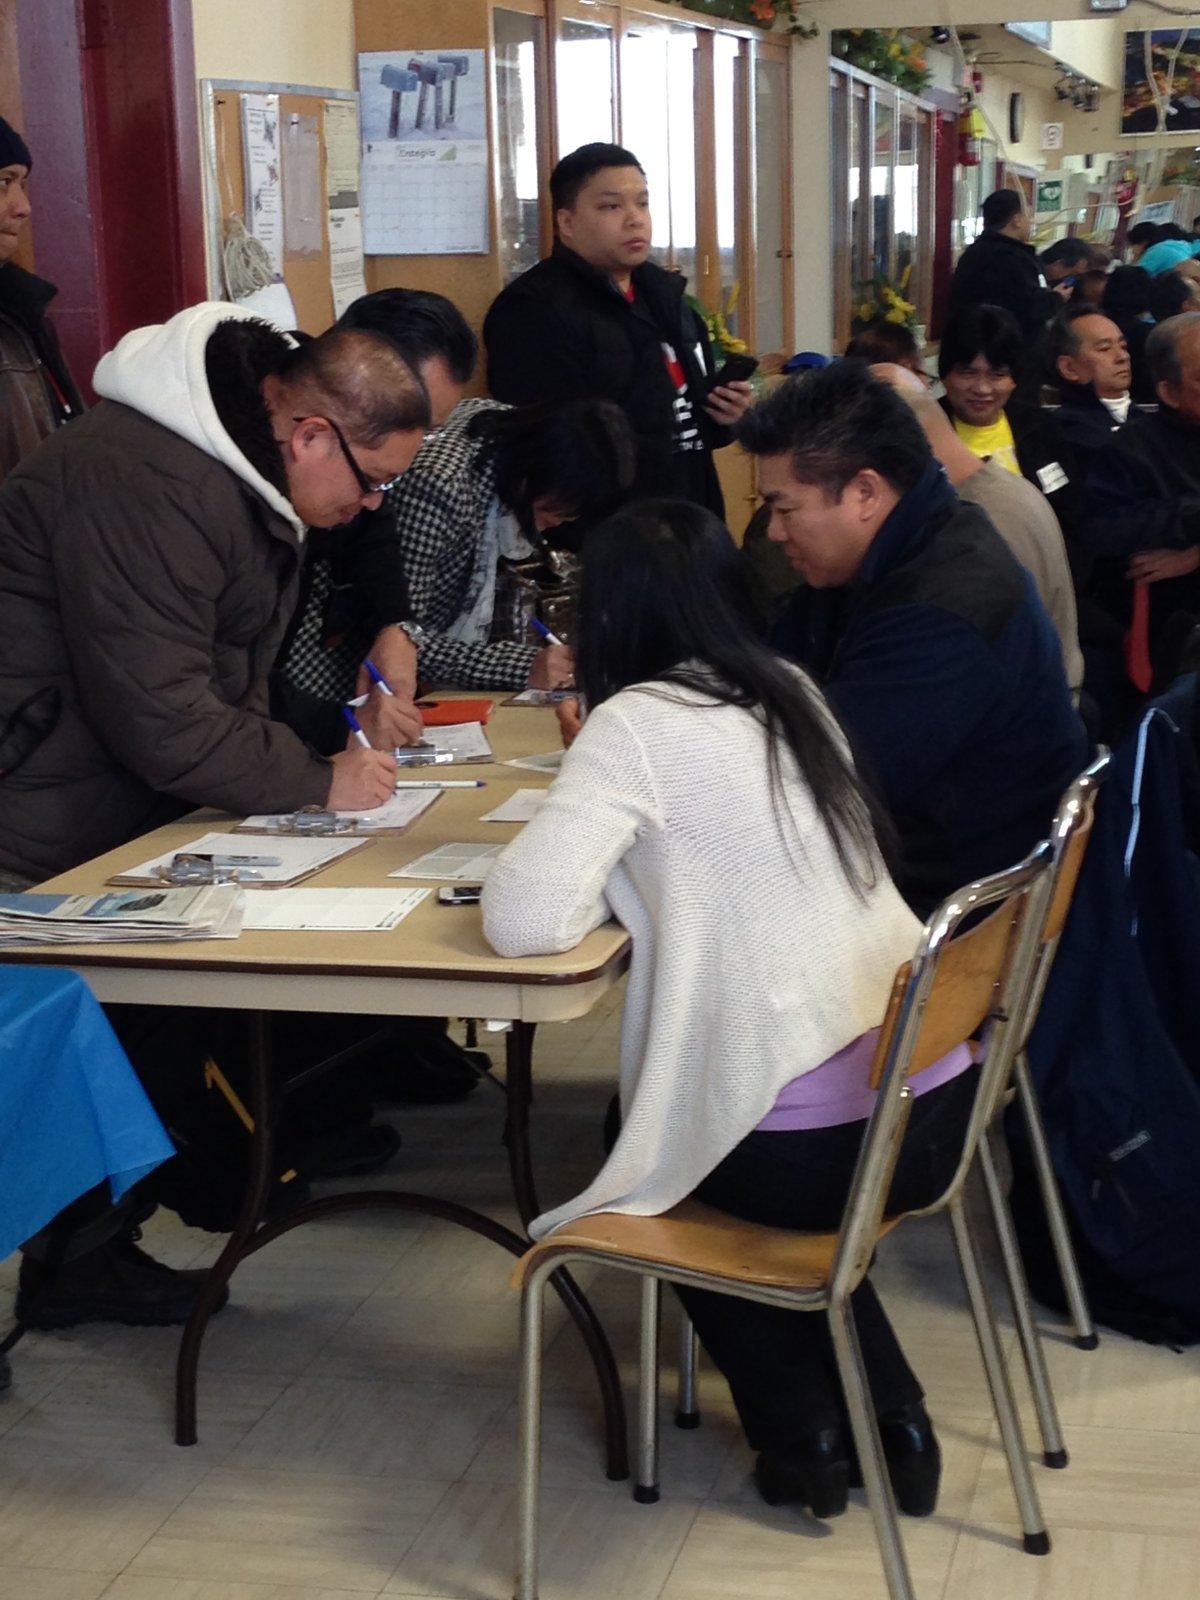 Members of Winnipeg's Filipino community register for their first town hall meeting.